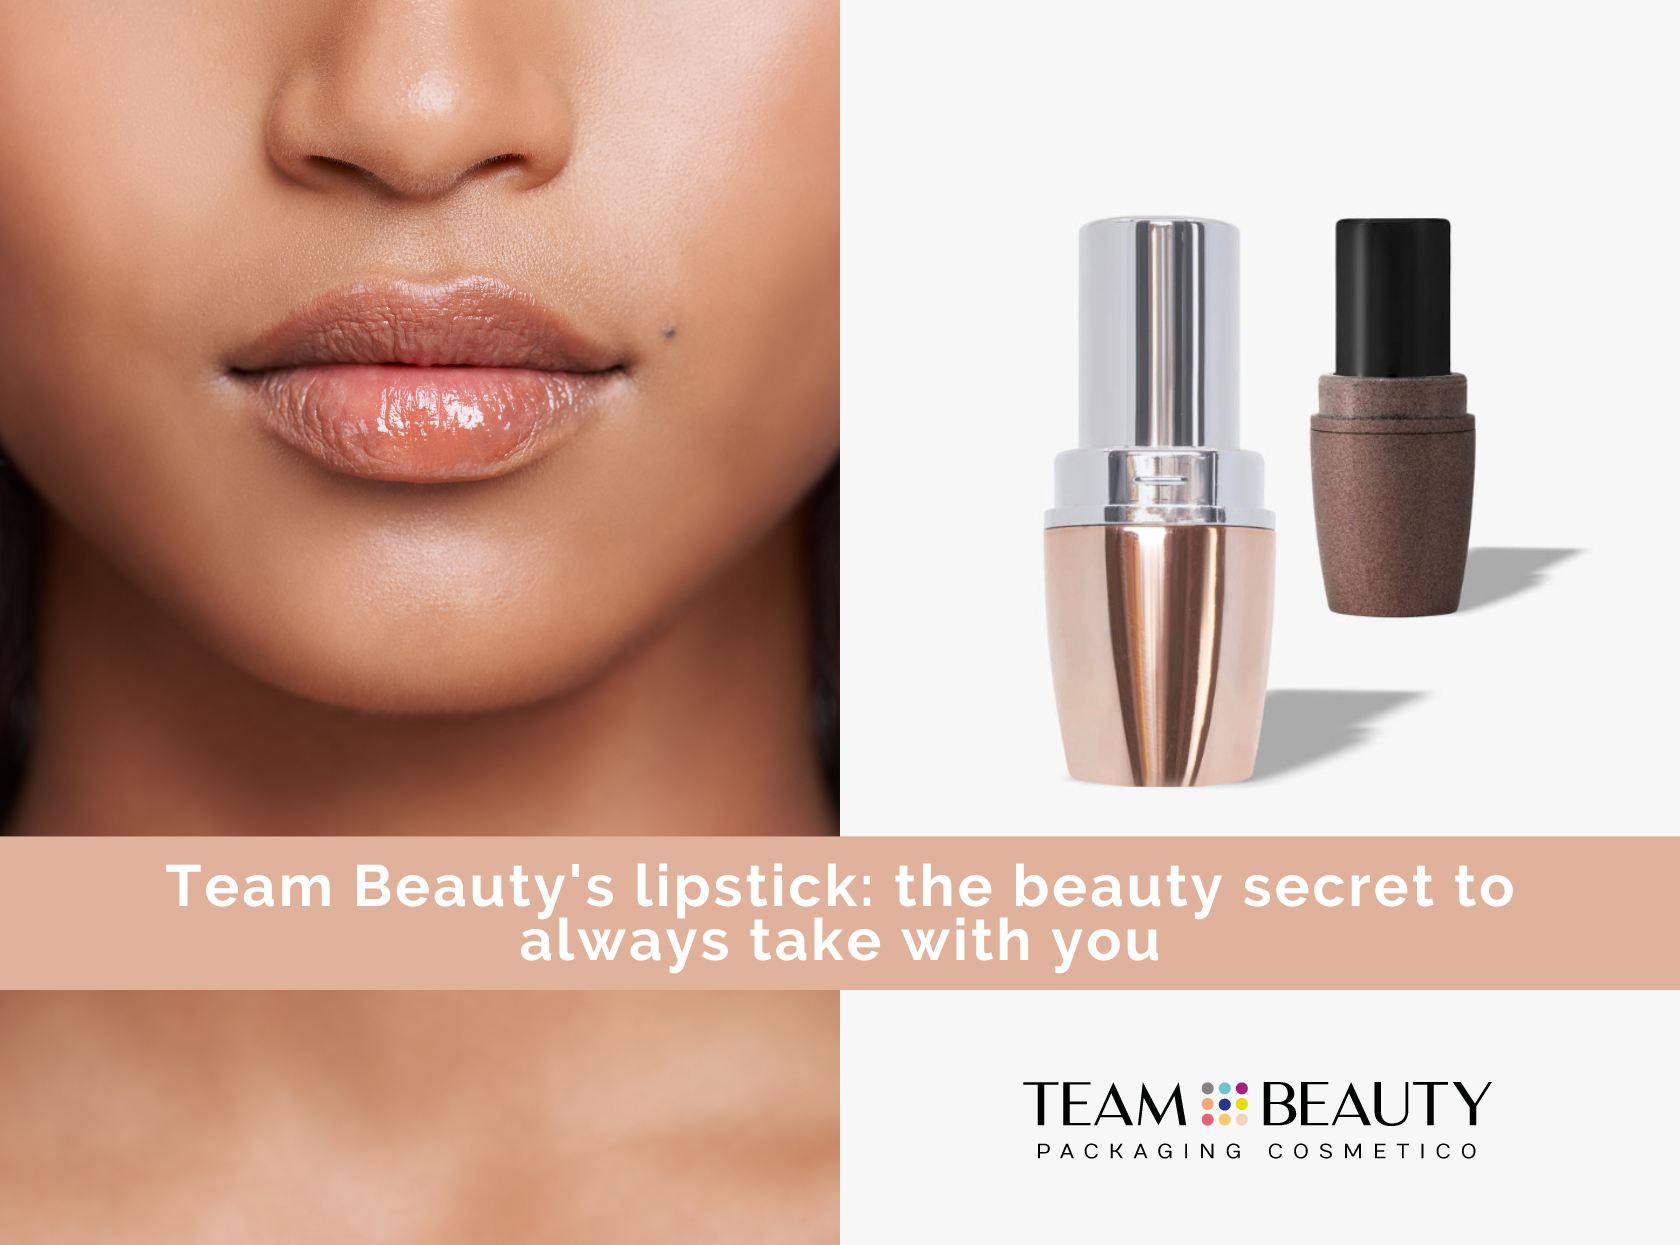 Team Beauty’s signature lipstick: the beauty secret to always take with you